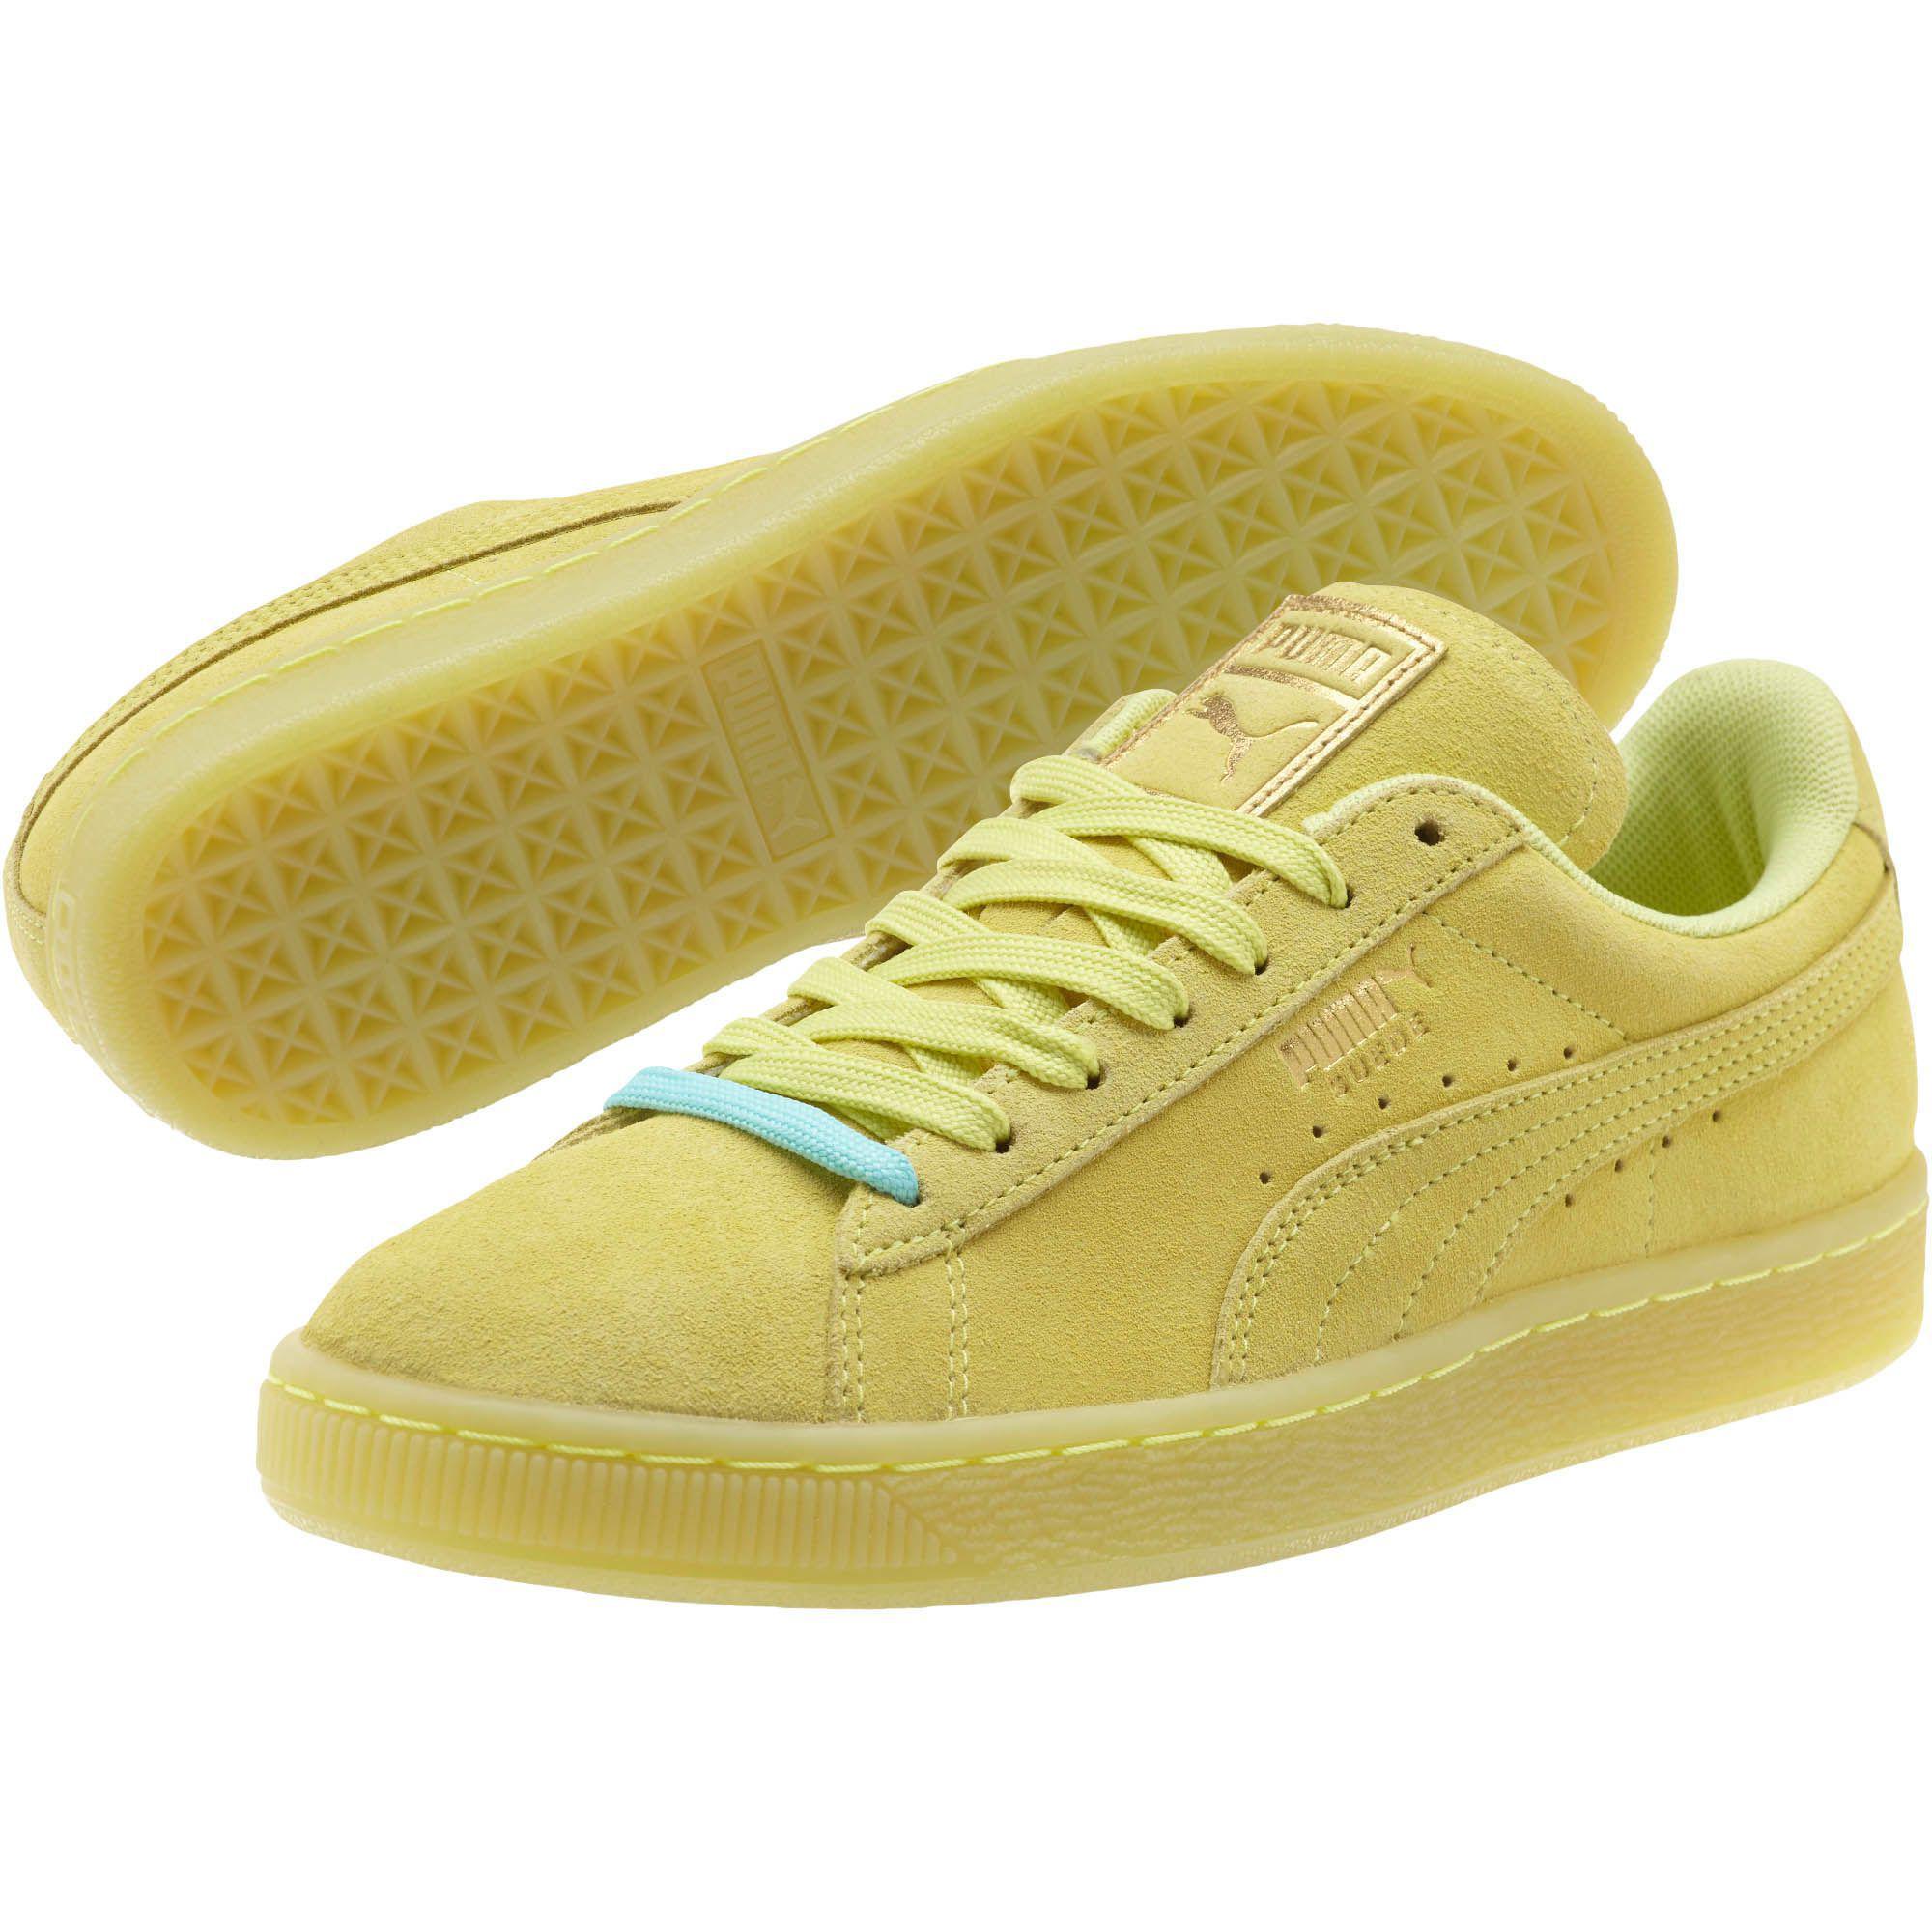 PUMA Suede Classic Iced Women's Sneakers in Yellow - Lyst